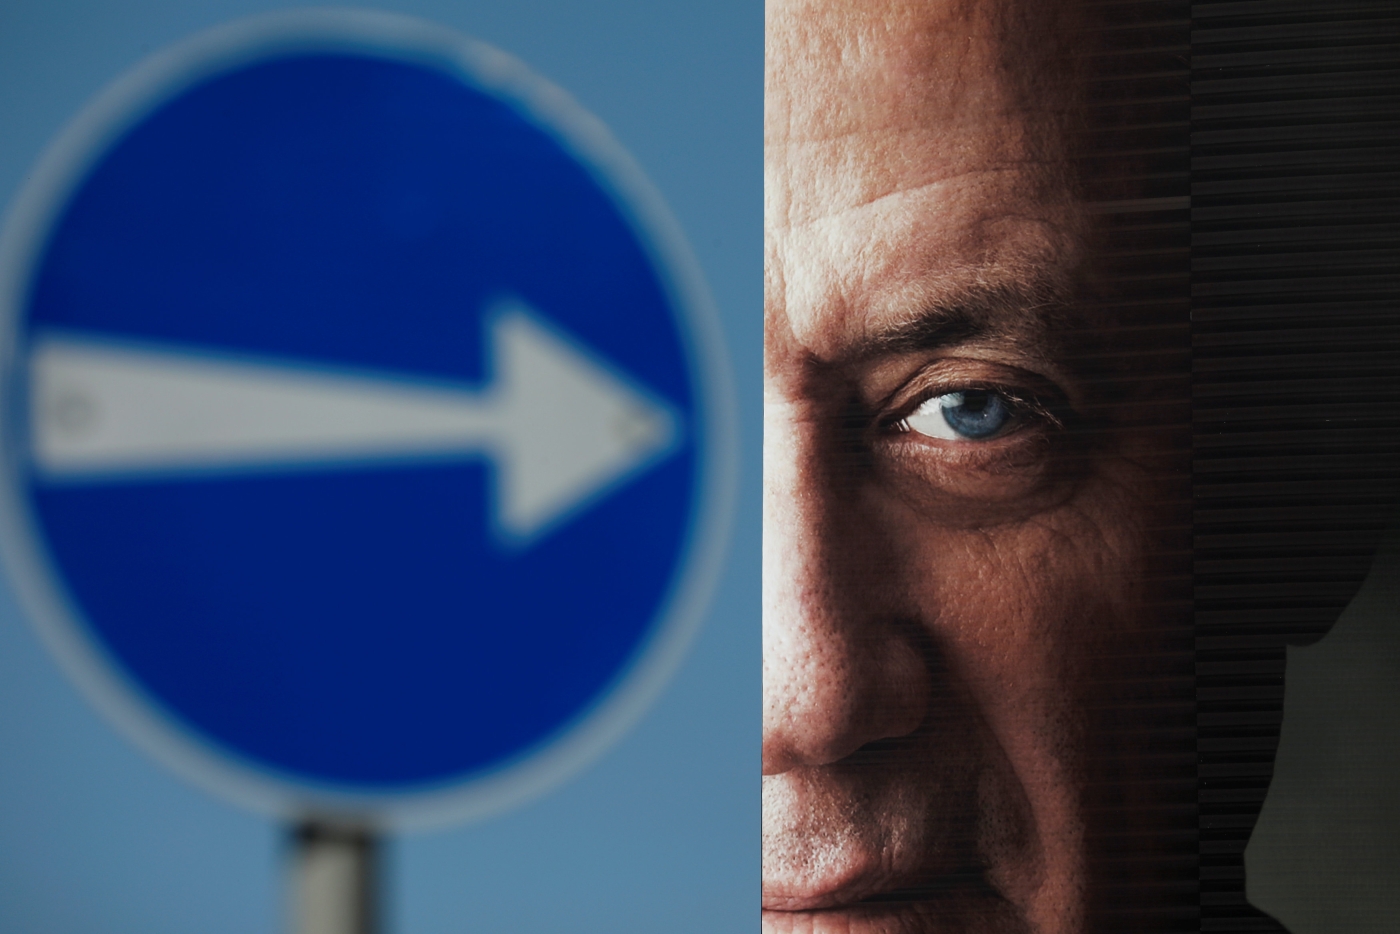 A part of a campaign billboard of Benny Gantz, a former Israeli armed forces chief and the head of a new political party, Israel Resilience, can be seen in Tel Aviv (Reuters)